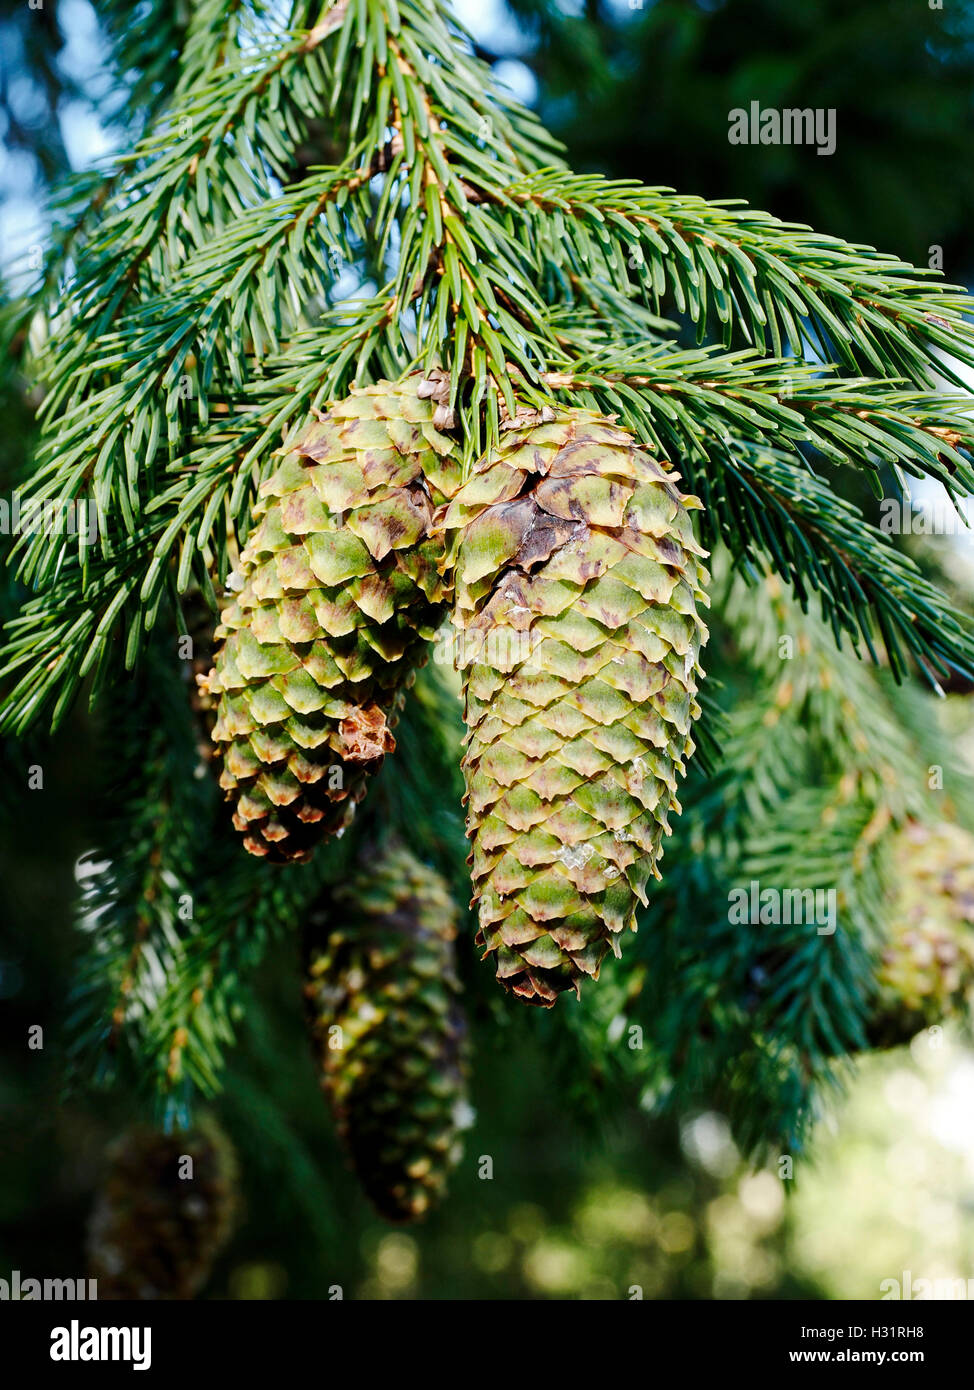 Cones and needles of Picea brachytyla var. Complanata, commonlyc Sargent's Spruce, an endangered mountain tree from China. Stock Photo